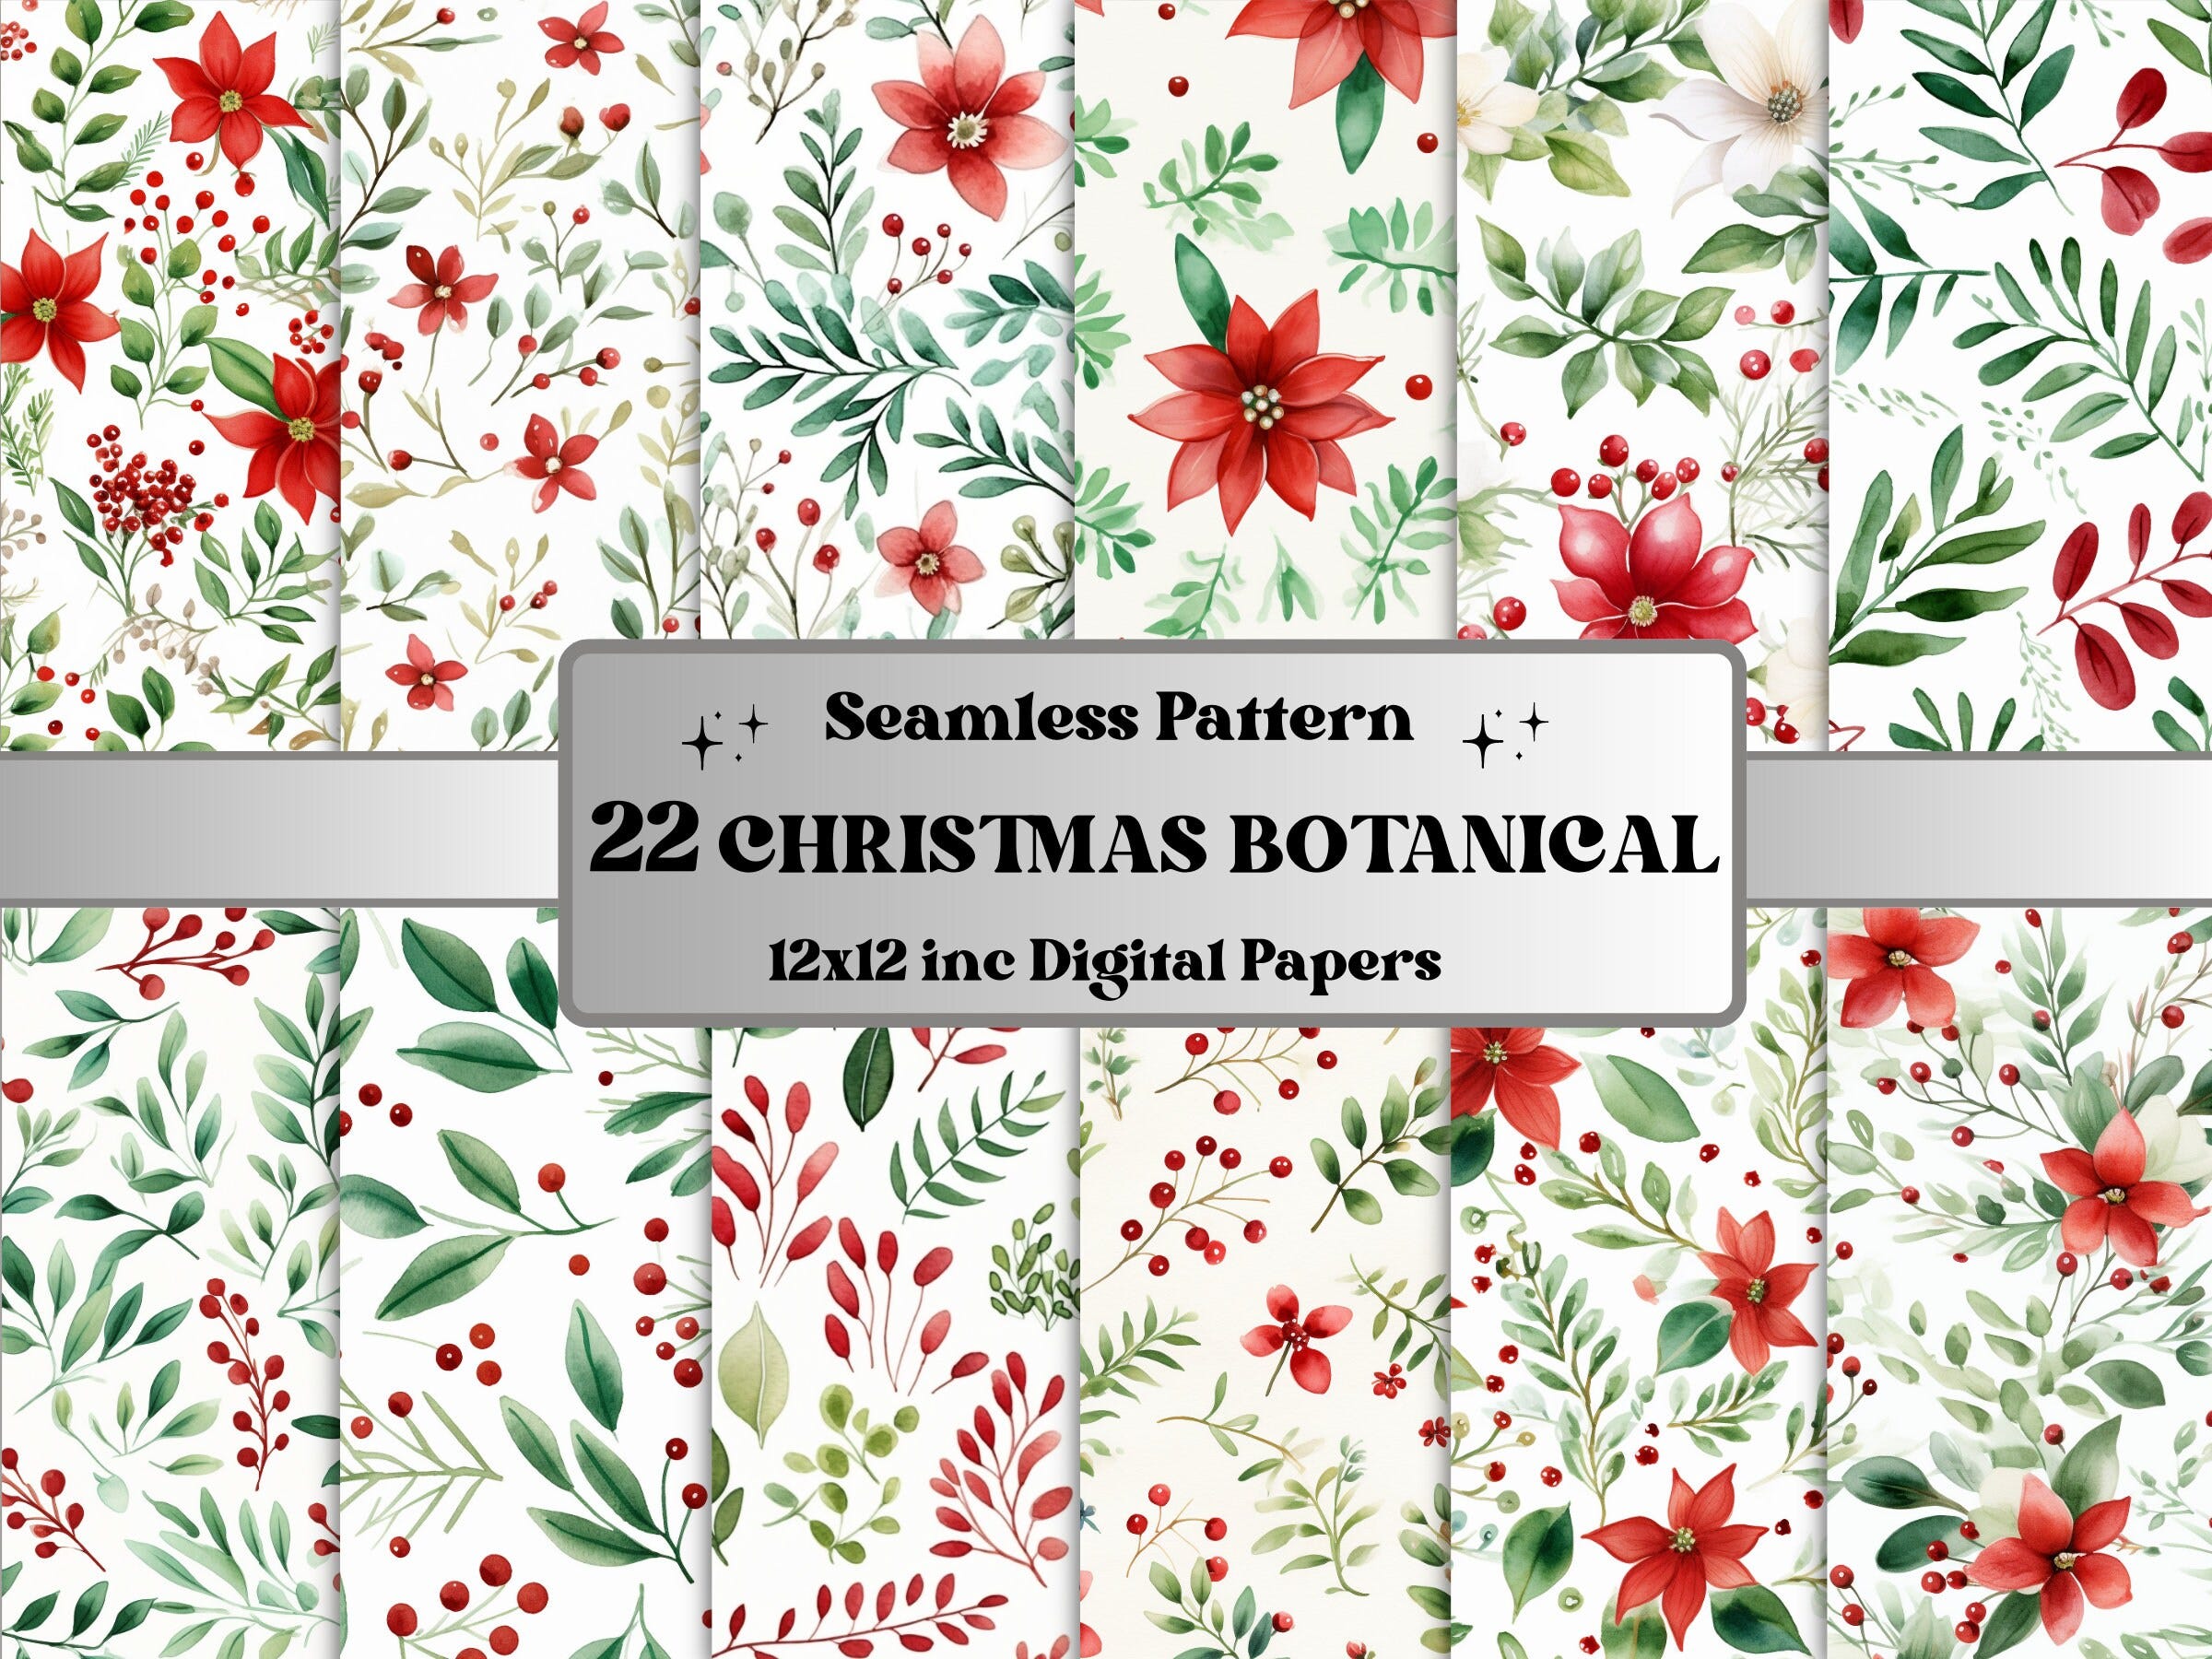 Seamless Watercolor Christmas Botanical Digital Paper Pack, Winter Flowers Seamless Pattern, Christmas Texture Background, Scrapbook Papers